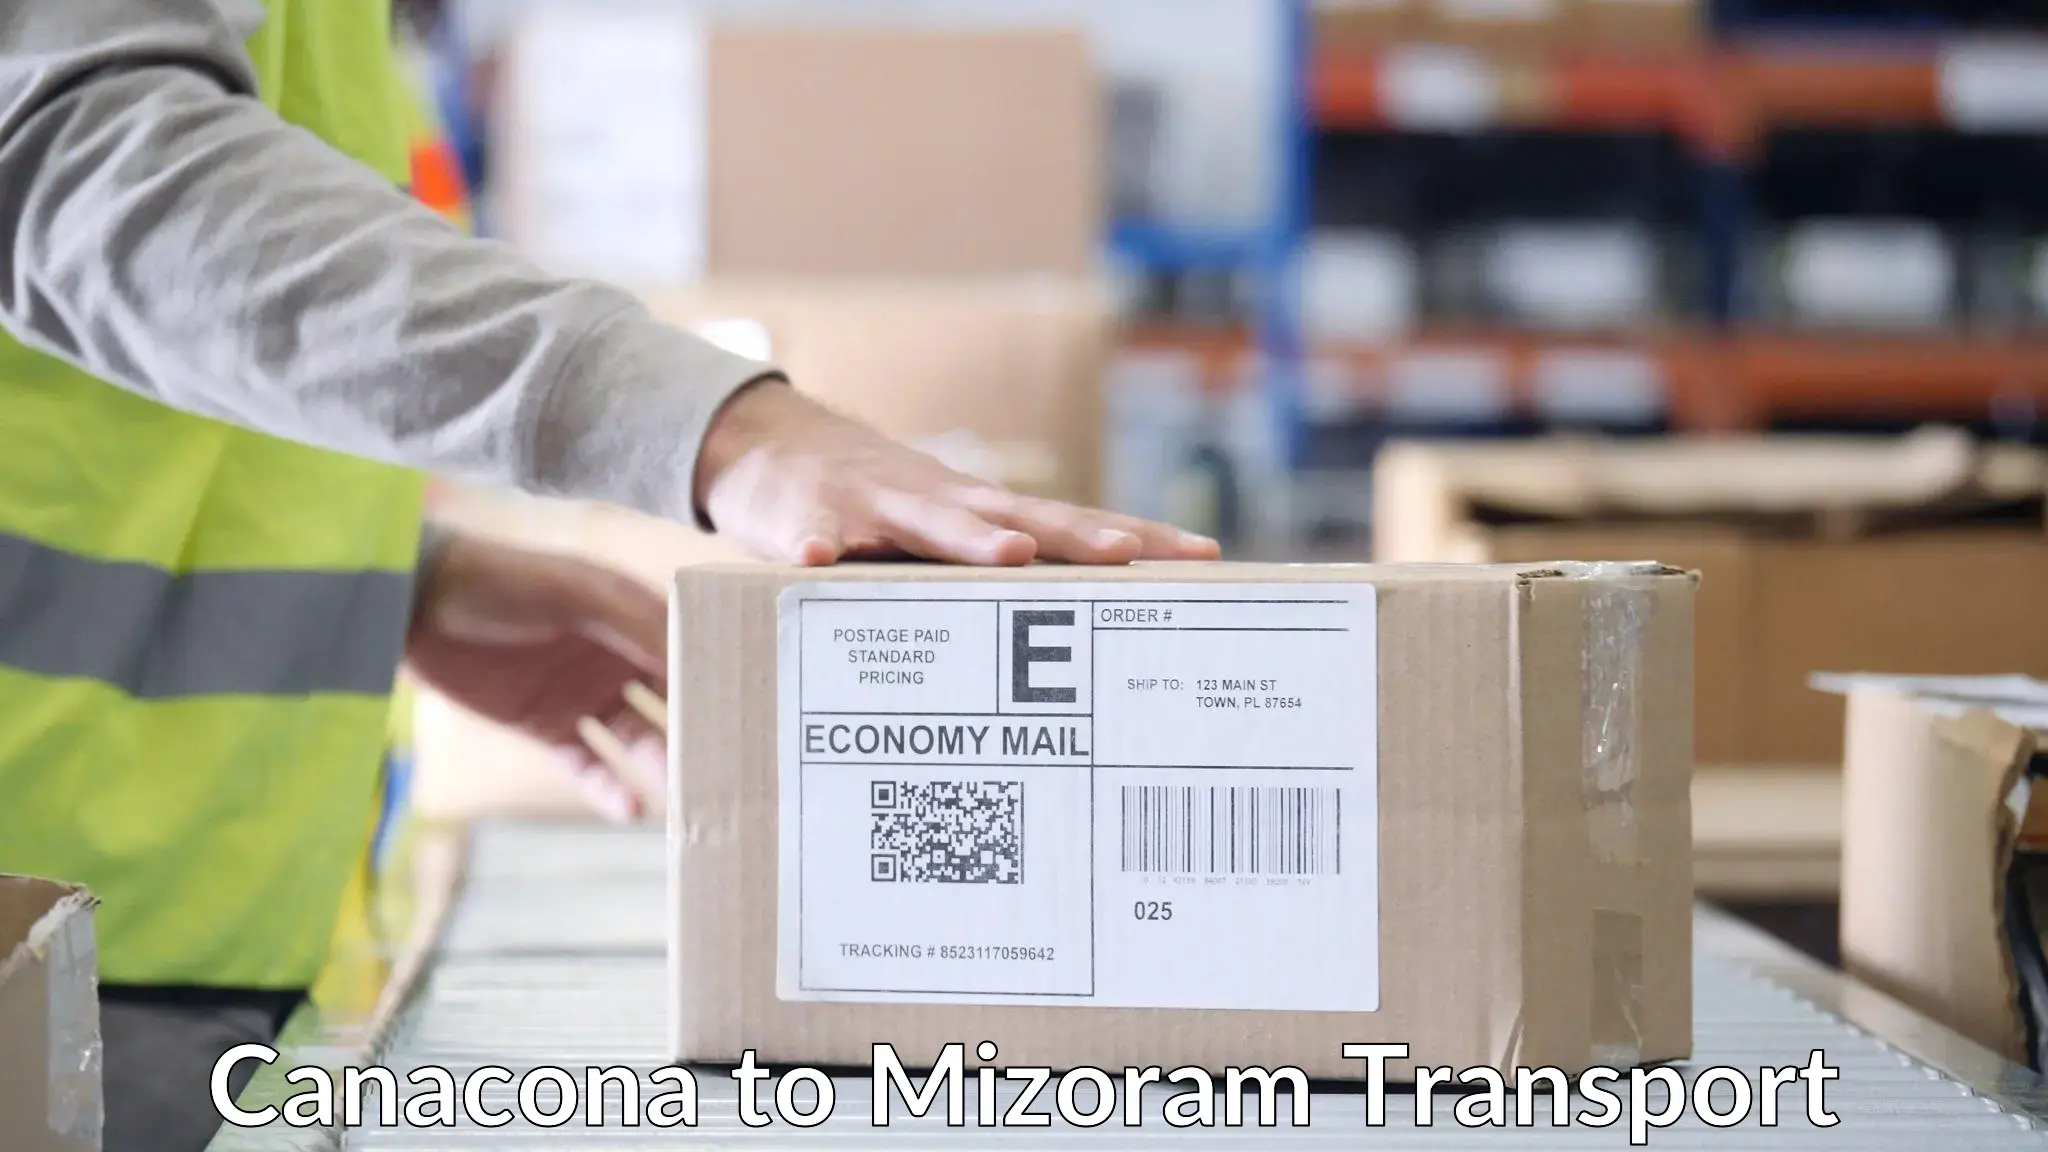 Air freight transport services in Canacona to Mizoram